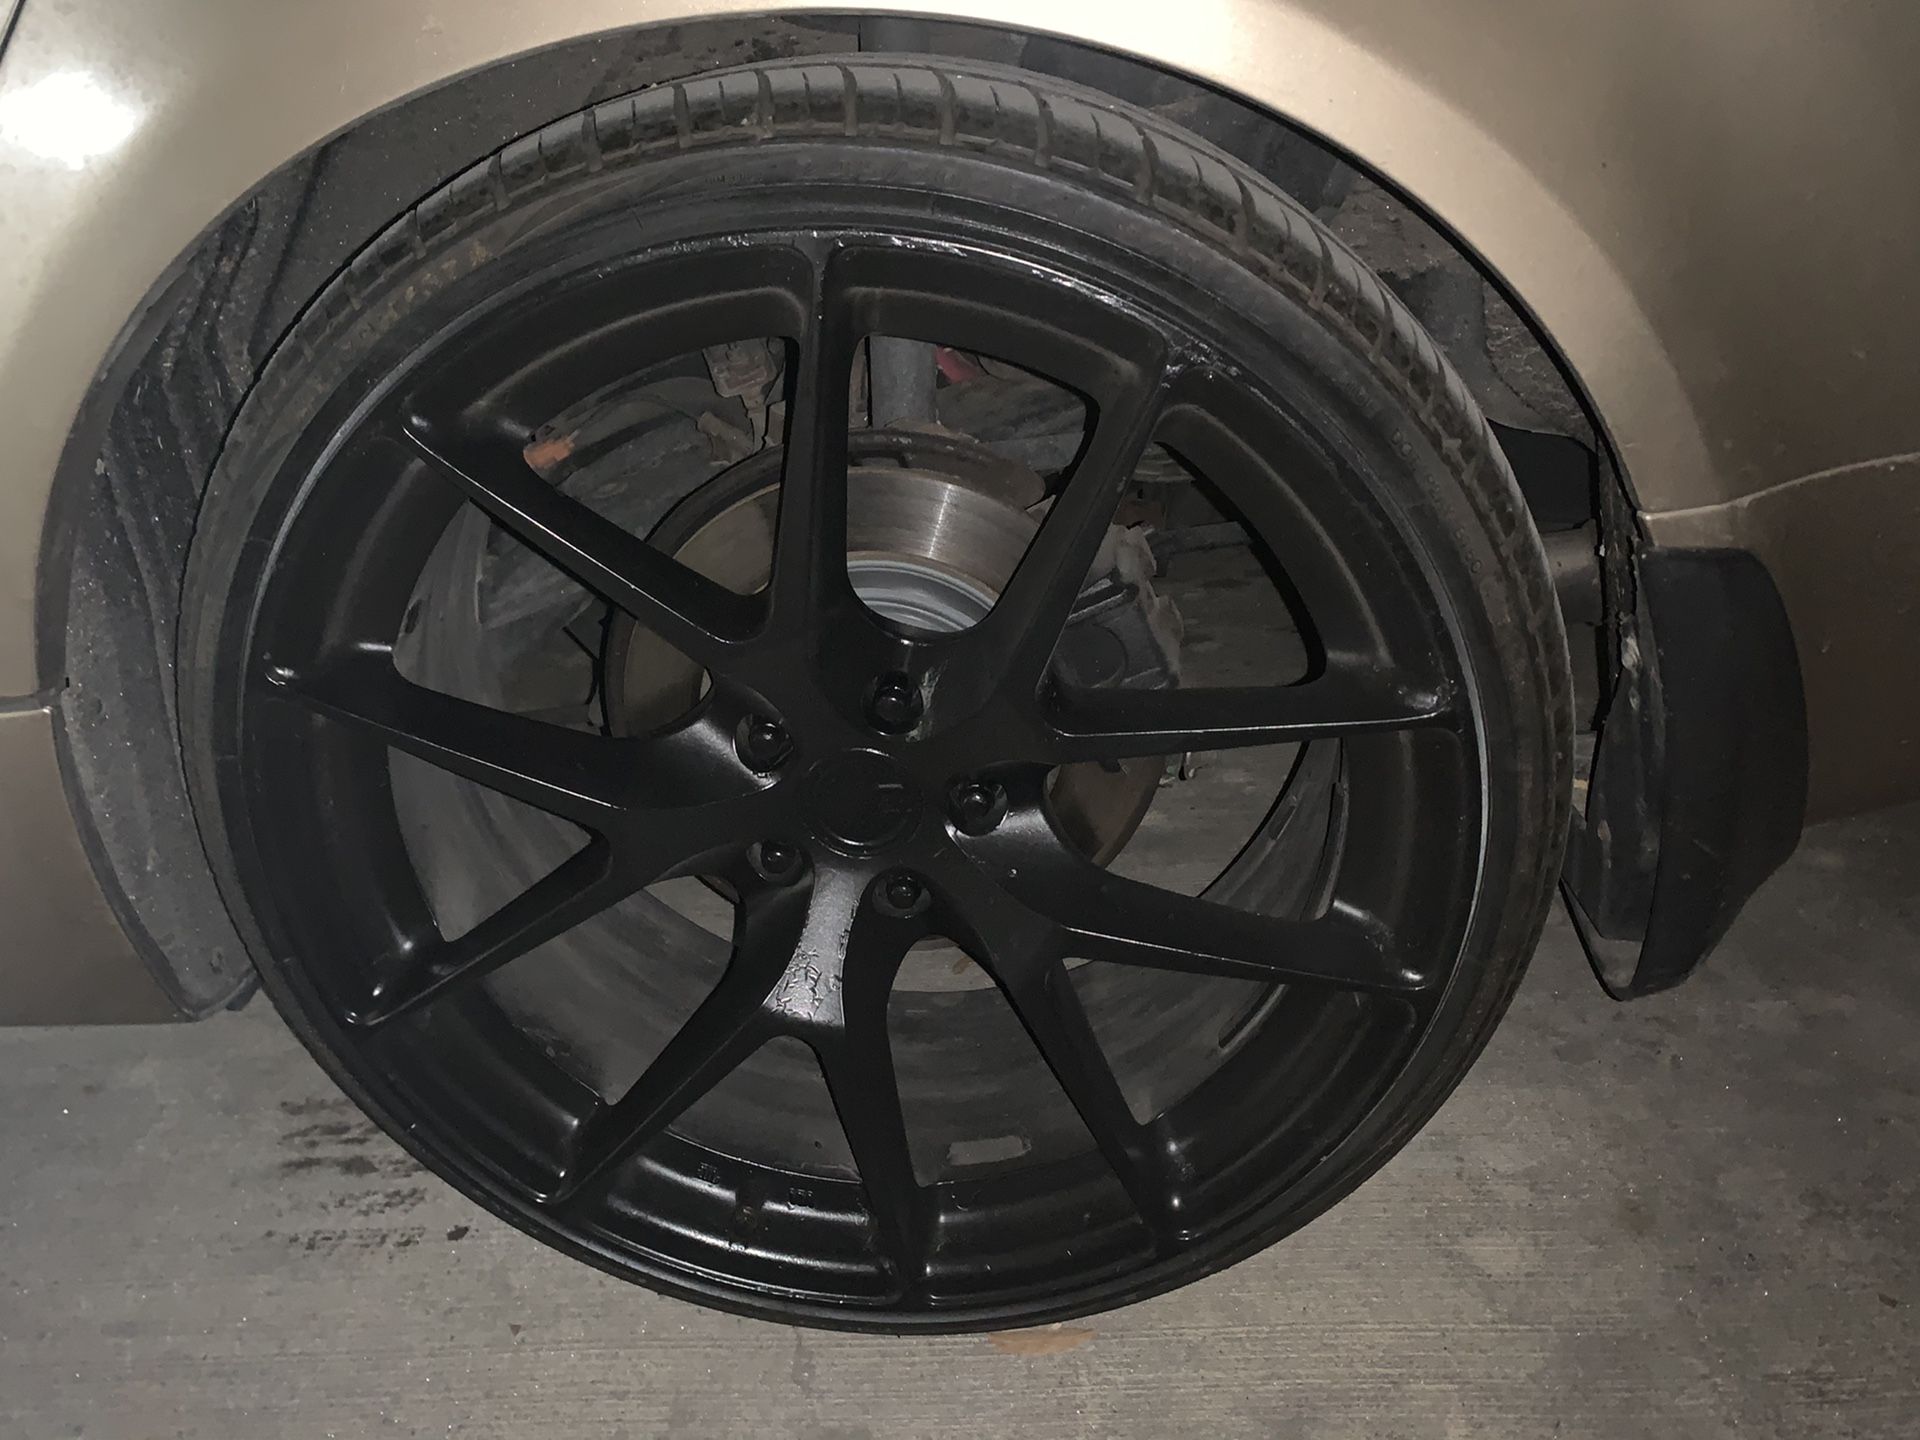 20” IPW rims and Lionhart tire package